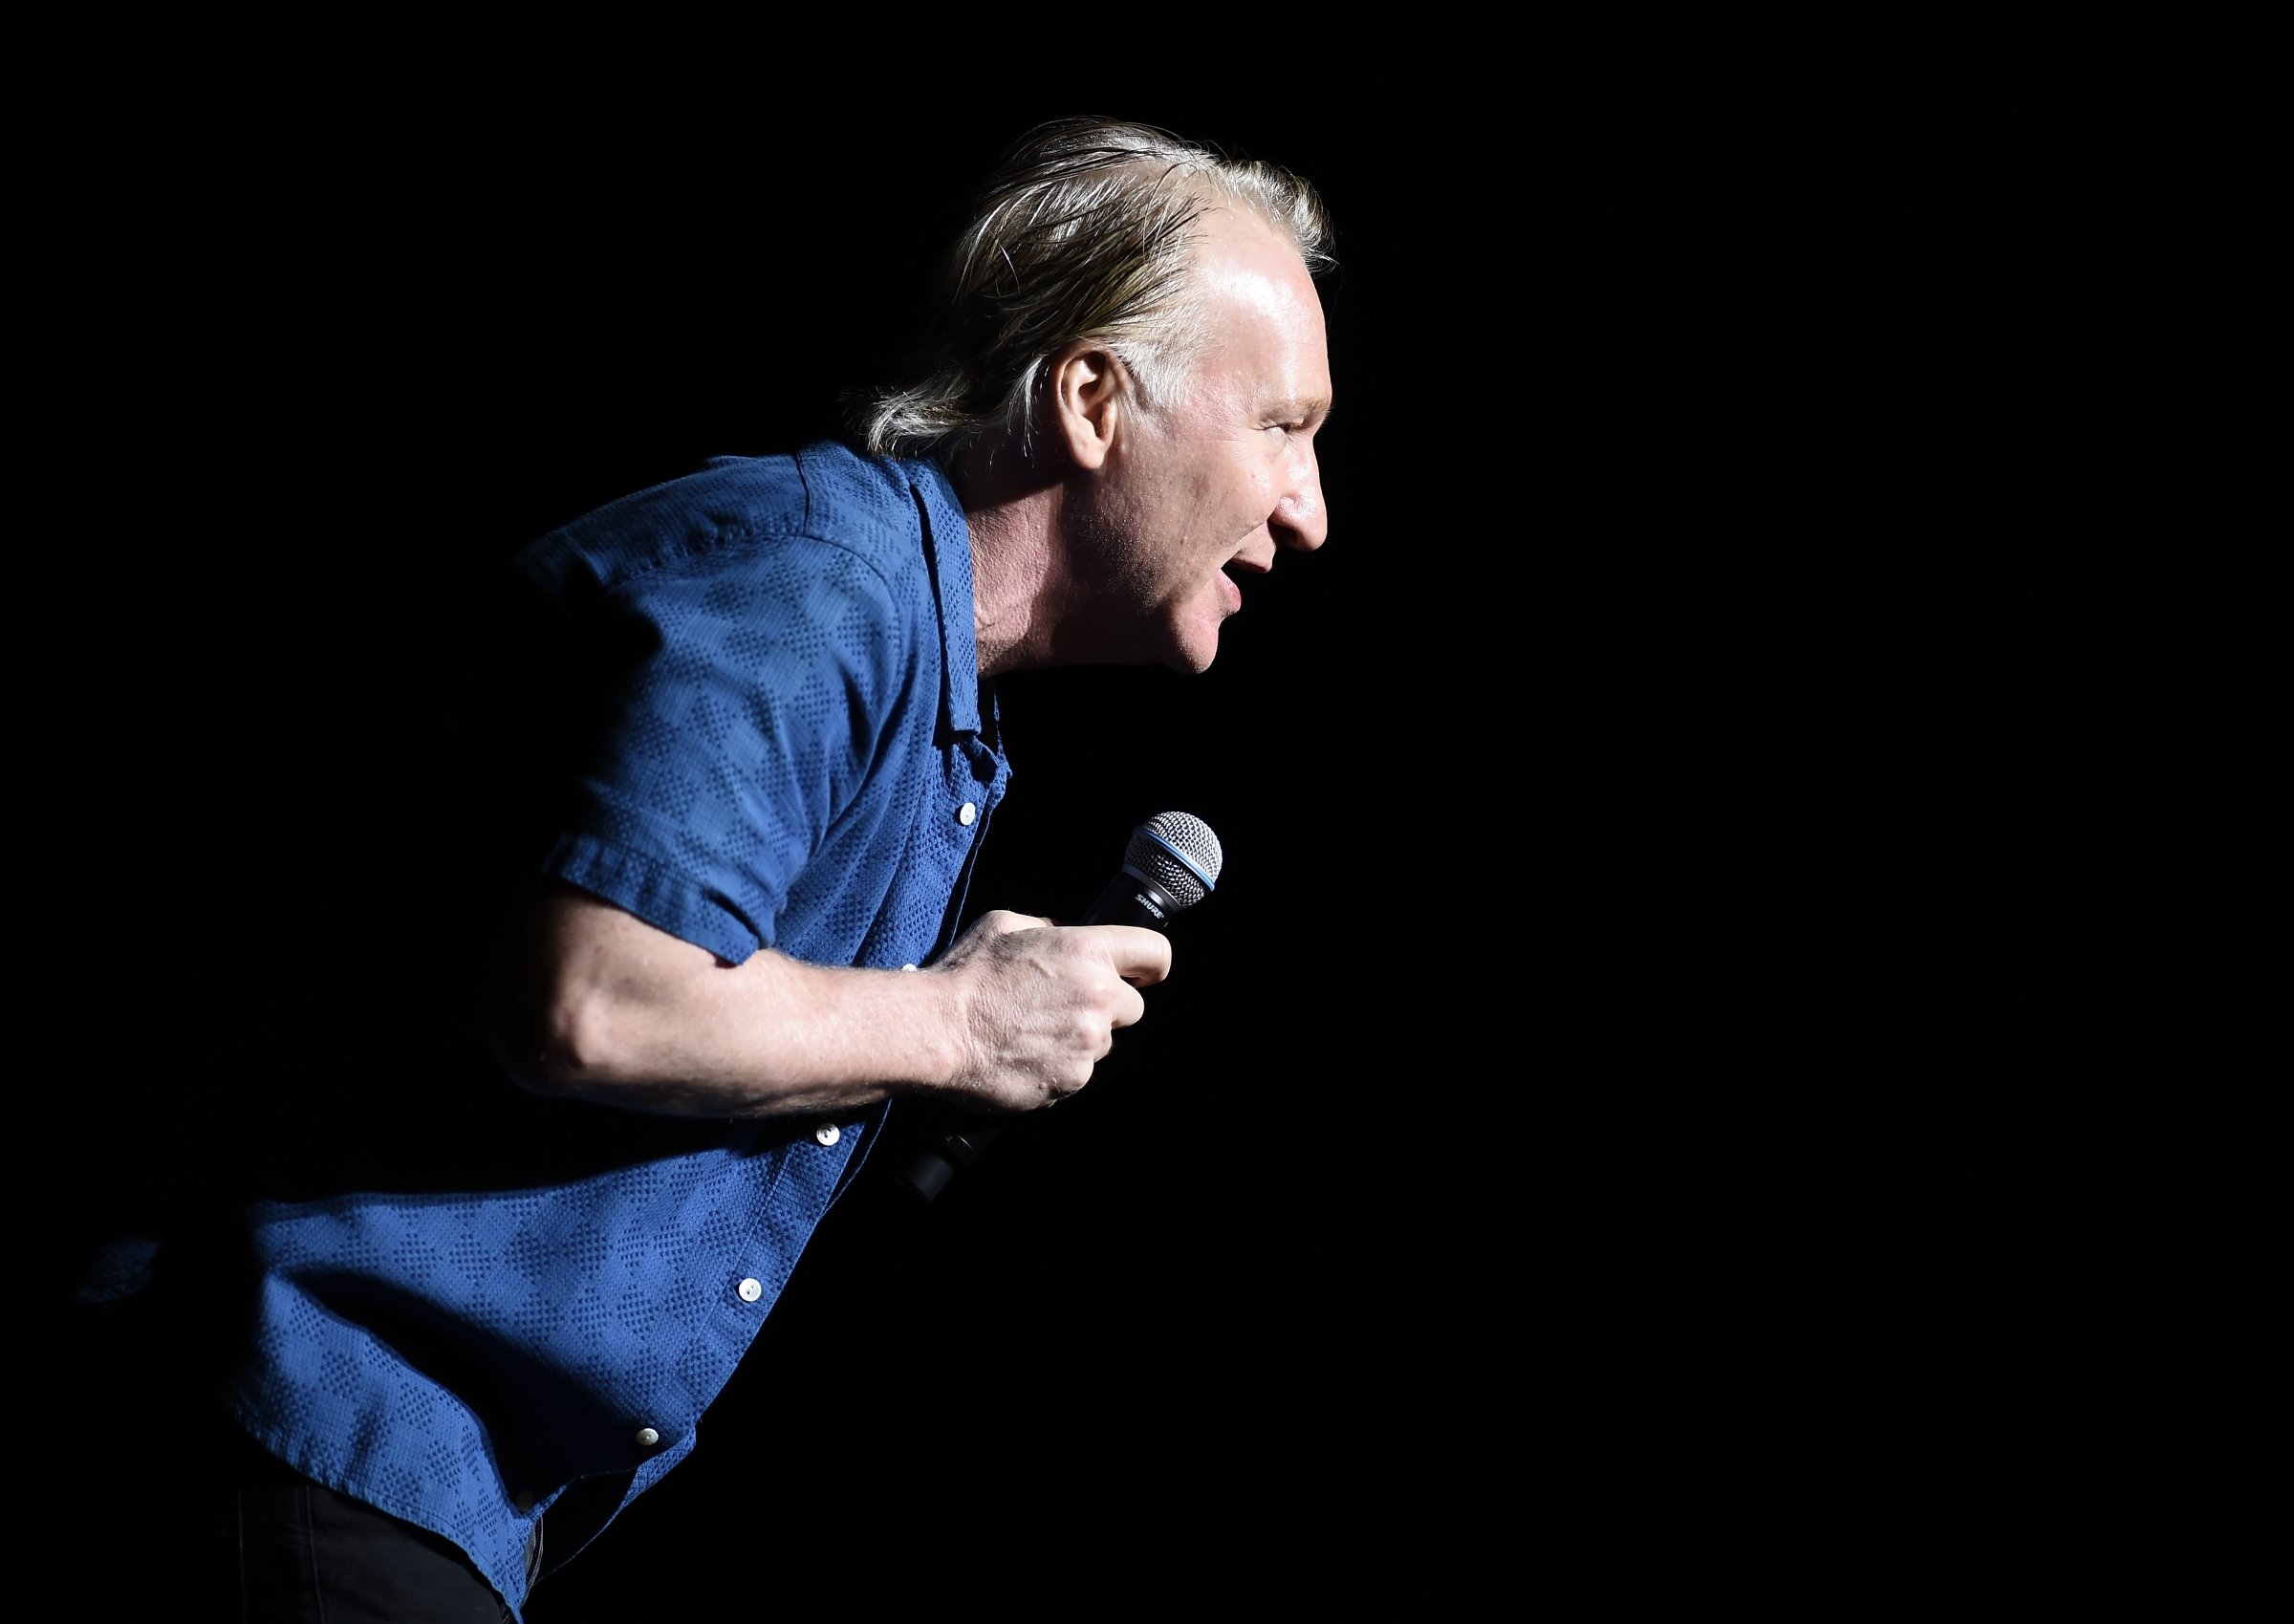 Bill Maher Performs During New York Comedy Festival